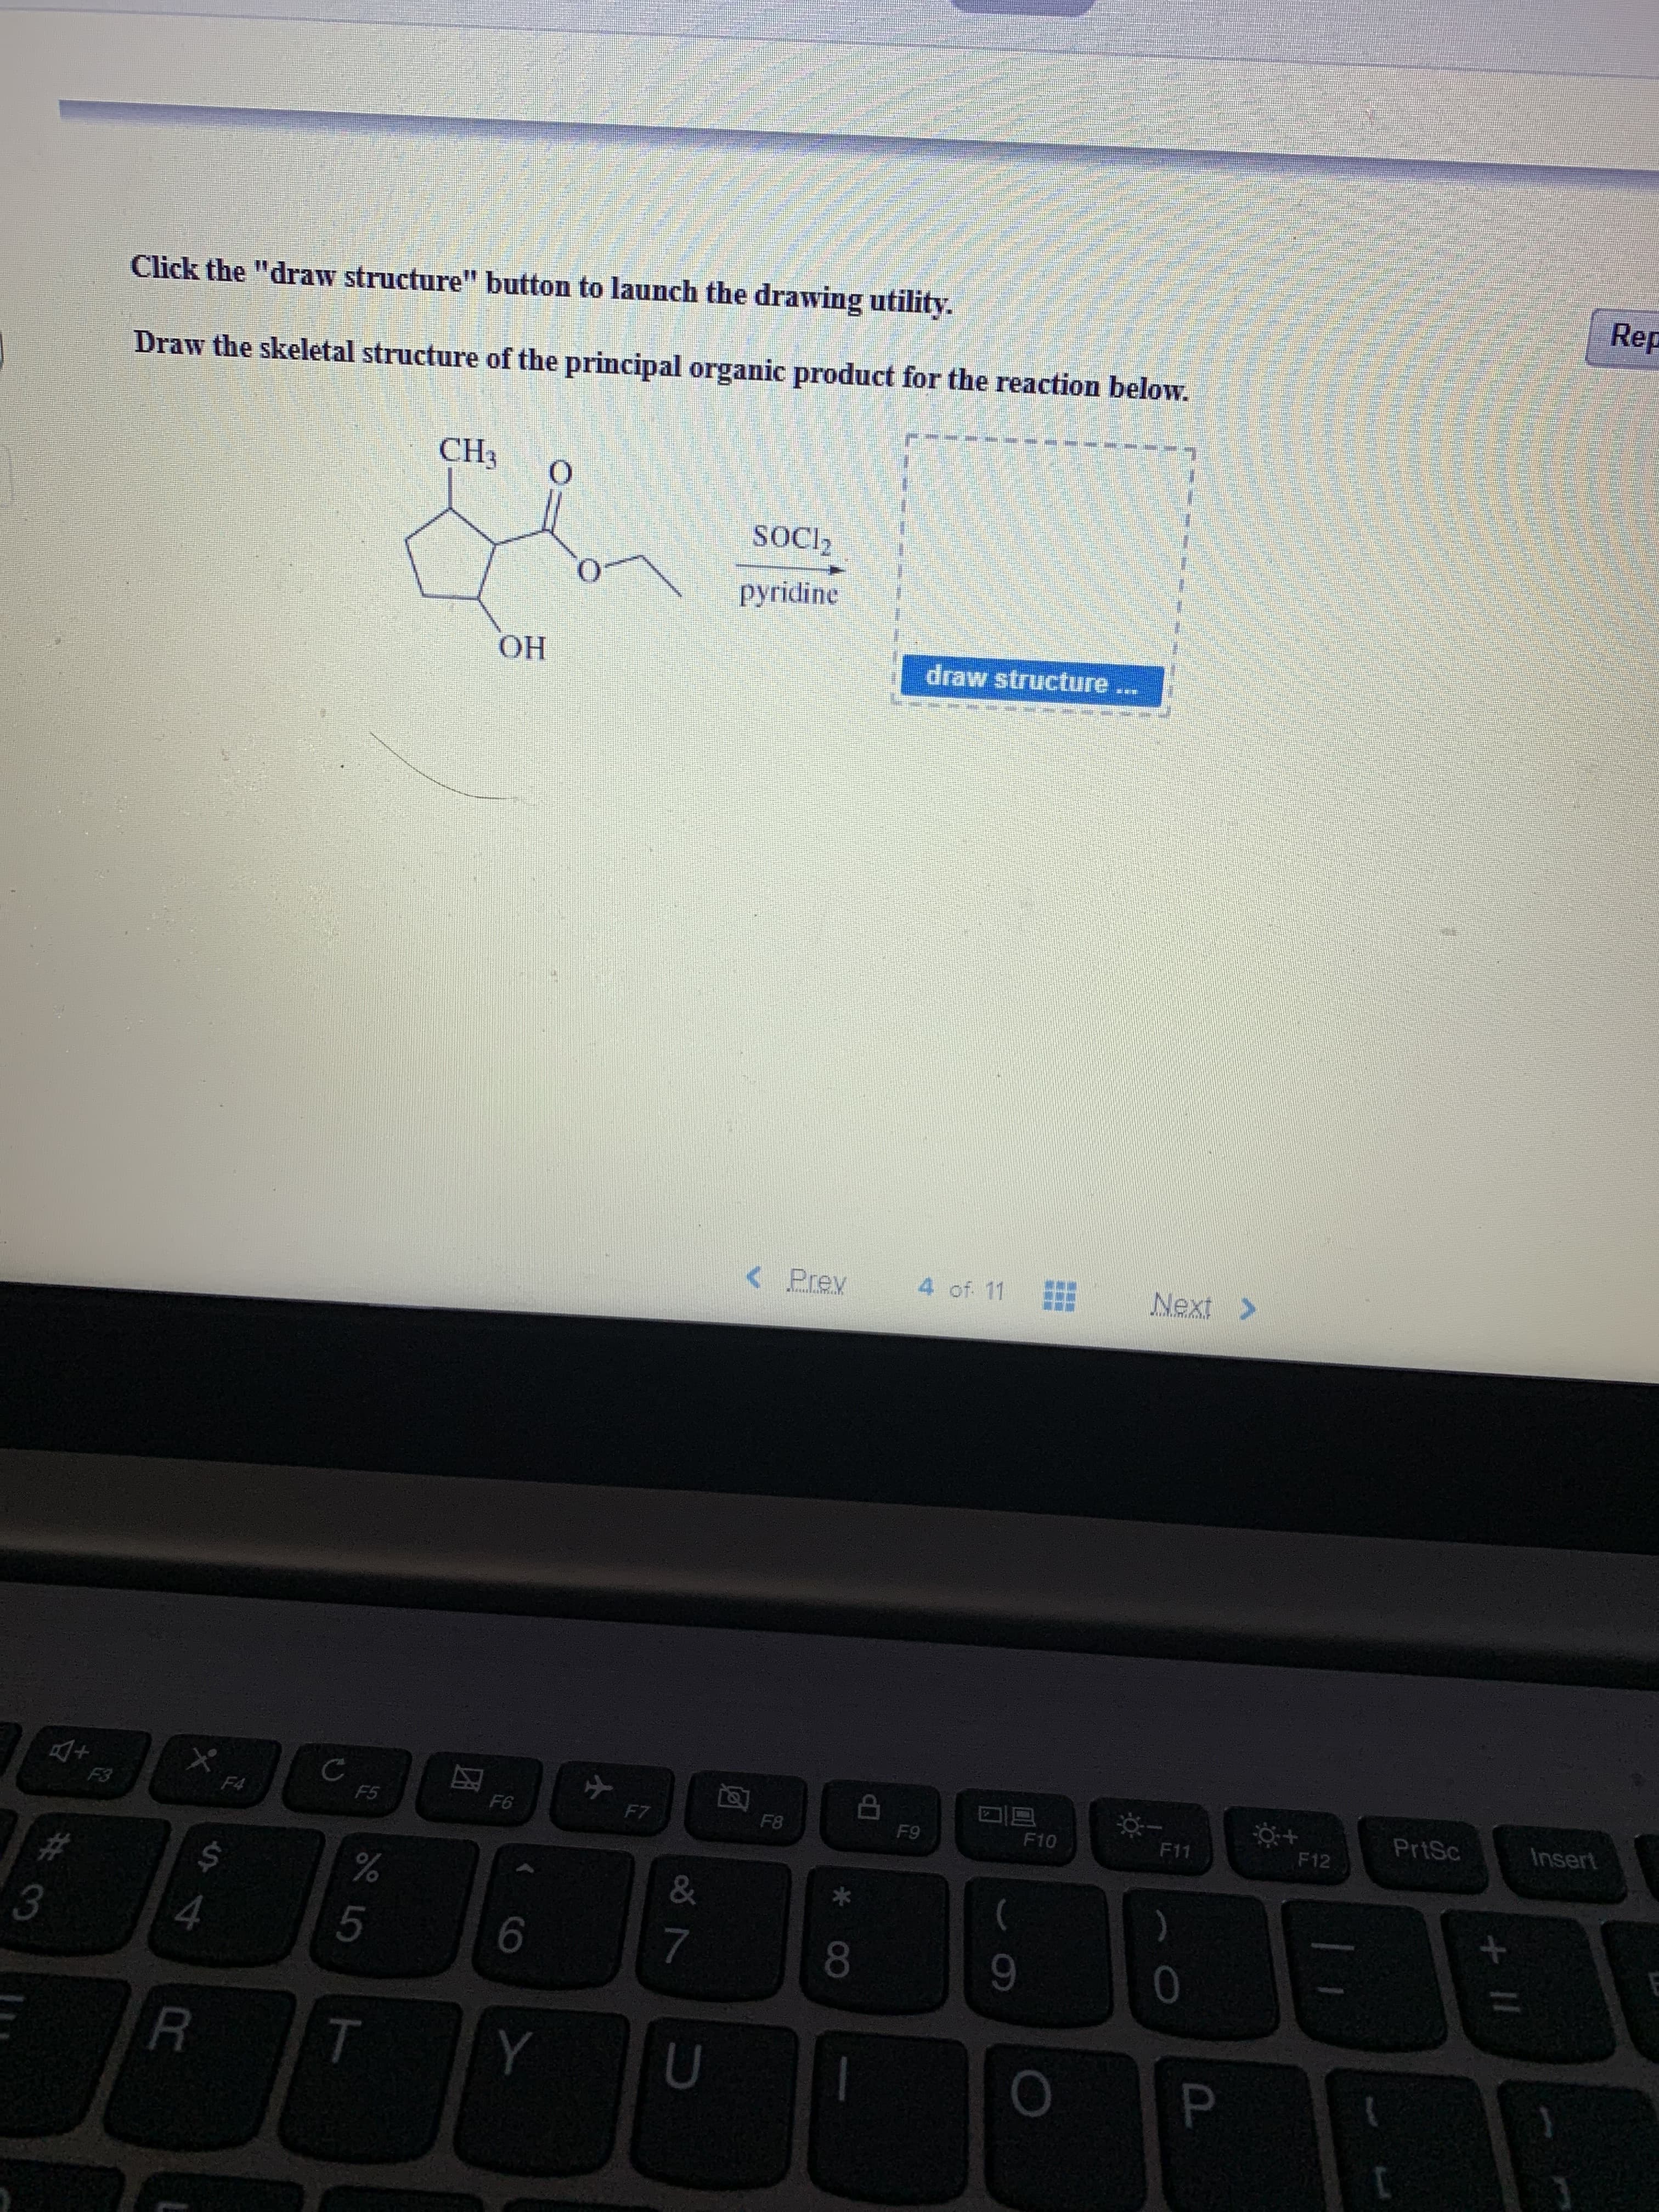 Rep
Click the "draw structure" button to launch the drawing utility.
Draw the skeletal structure of the principal organic product for the reaction below.
CH3
O
SOCI2
pyridine
draw structure
OH
Next>
4 of. 11
<Prev
Insert
PrtSc
X
F12
F11
F10
F9
F8
F7
F6
F5
F4
F3
)
&
#
0
7
4
3
P
U
Y
T
R
+II
LO
ST
